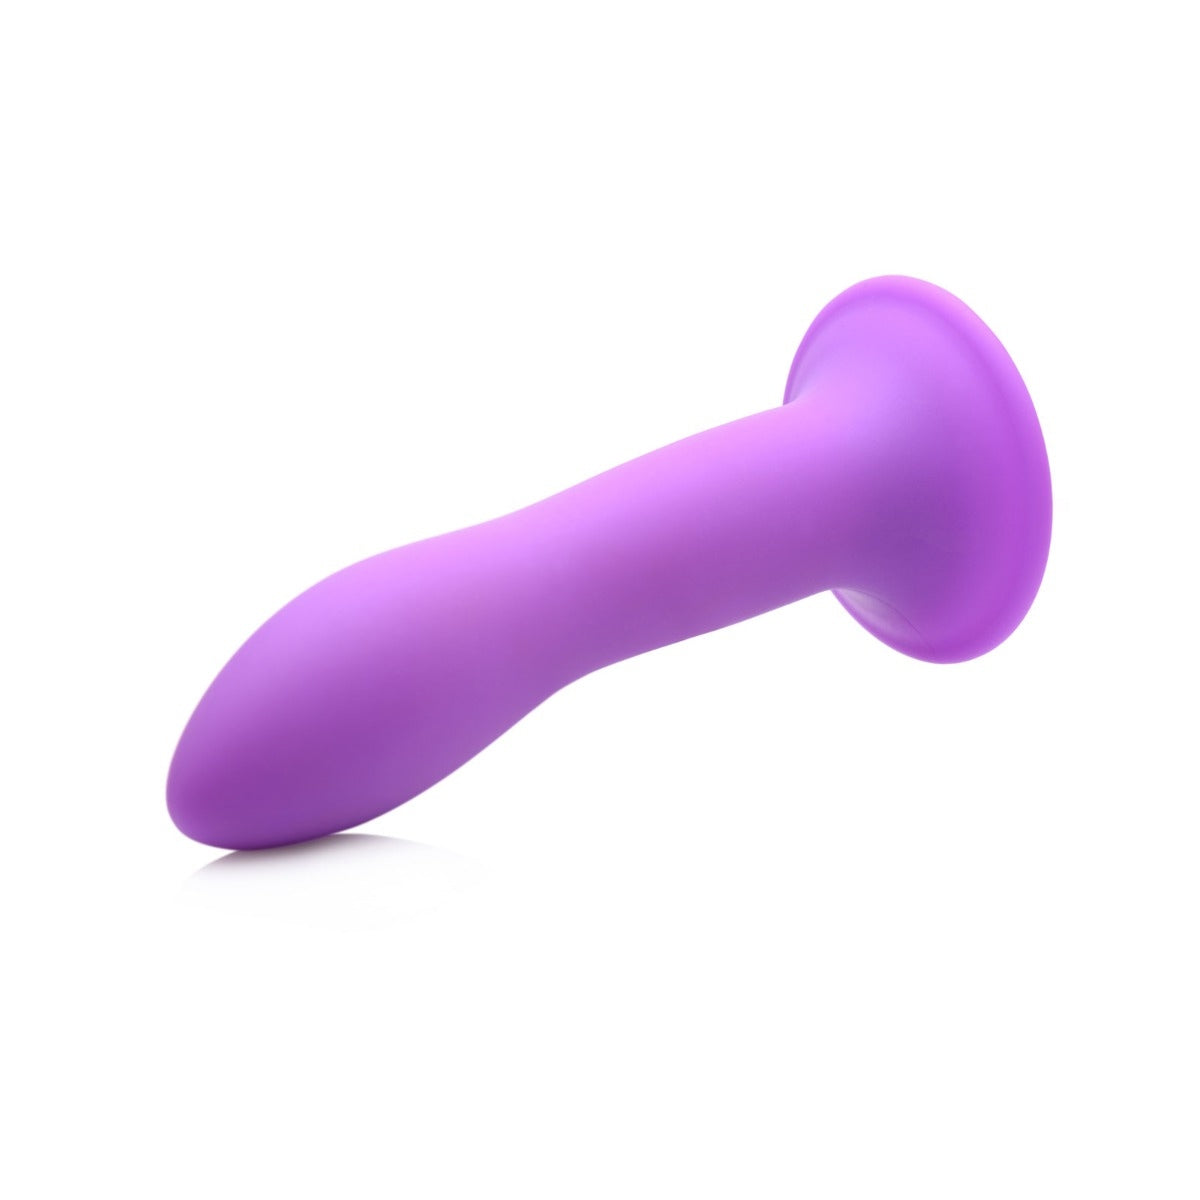 Squeeze-It Squeezable Slender Dildo Purple 5 Inch